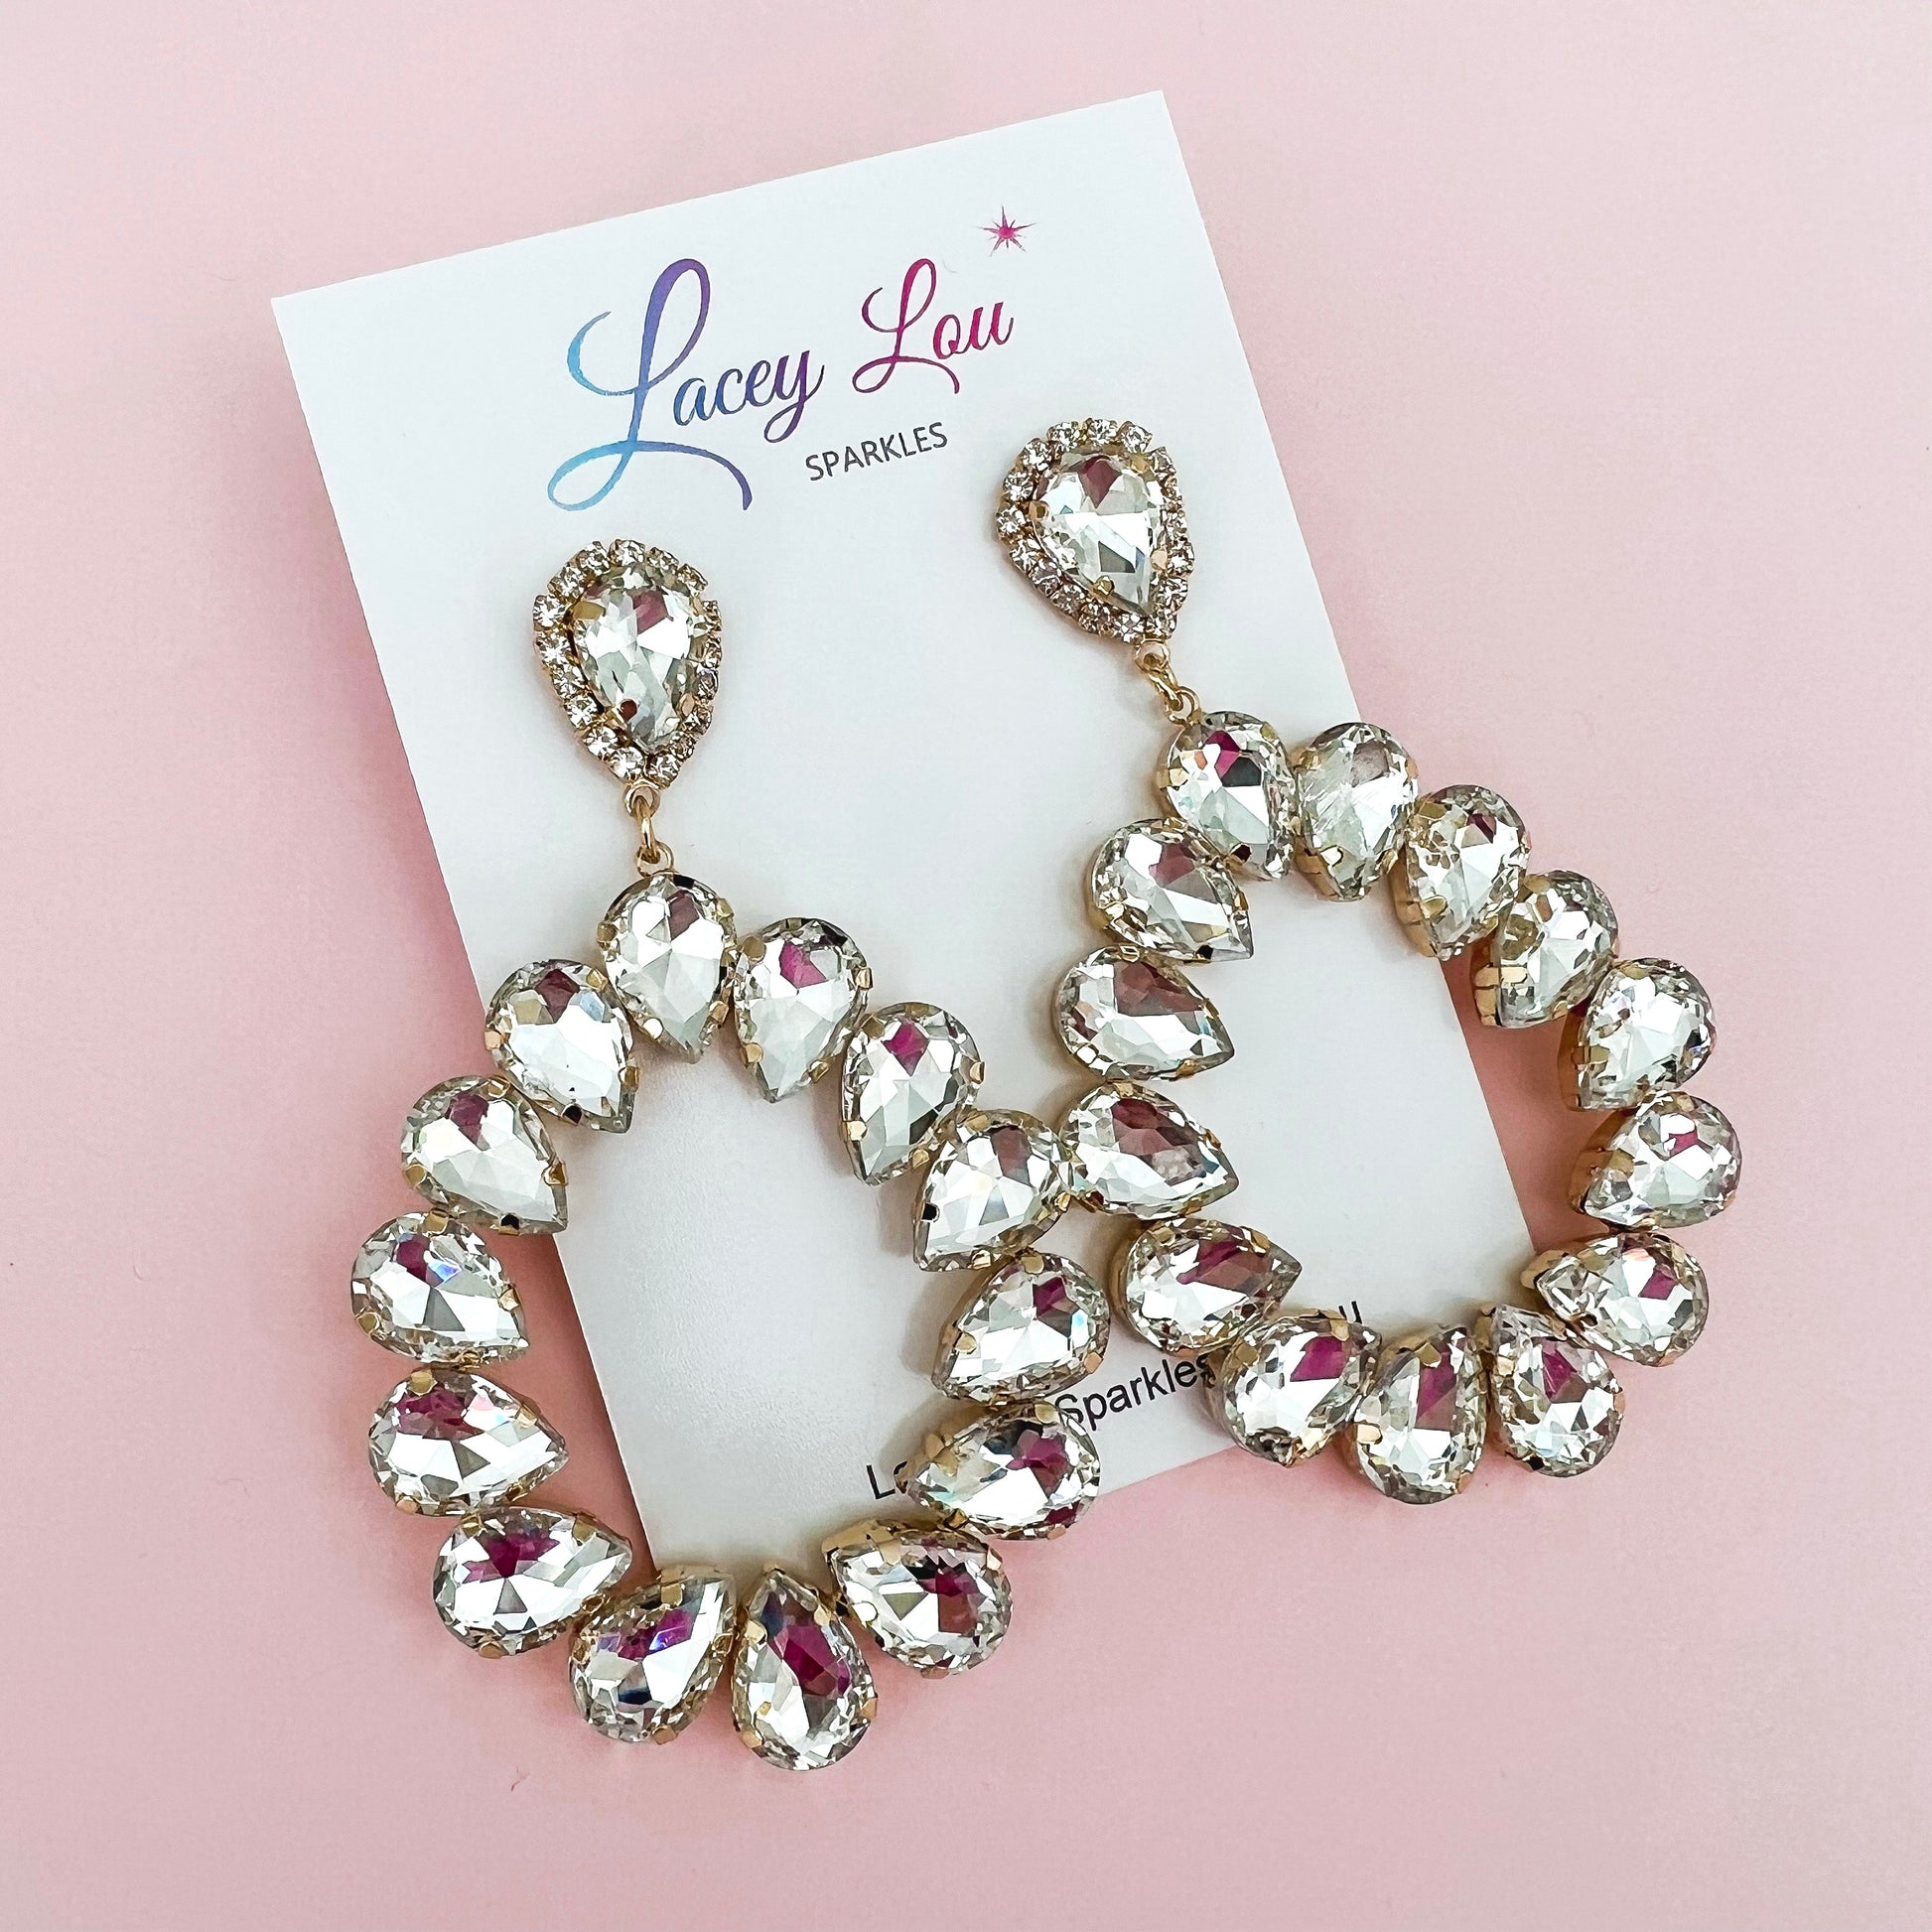 CLEARANCE Liv Rhinestone Statement Dangles - Crystal - Lacey Lou Sparkles